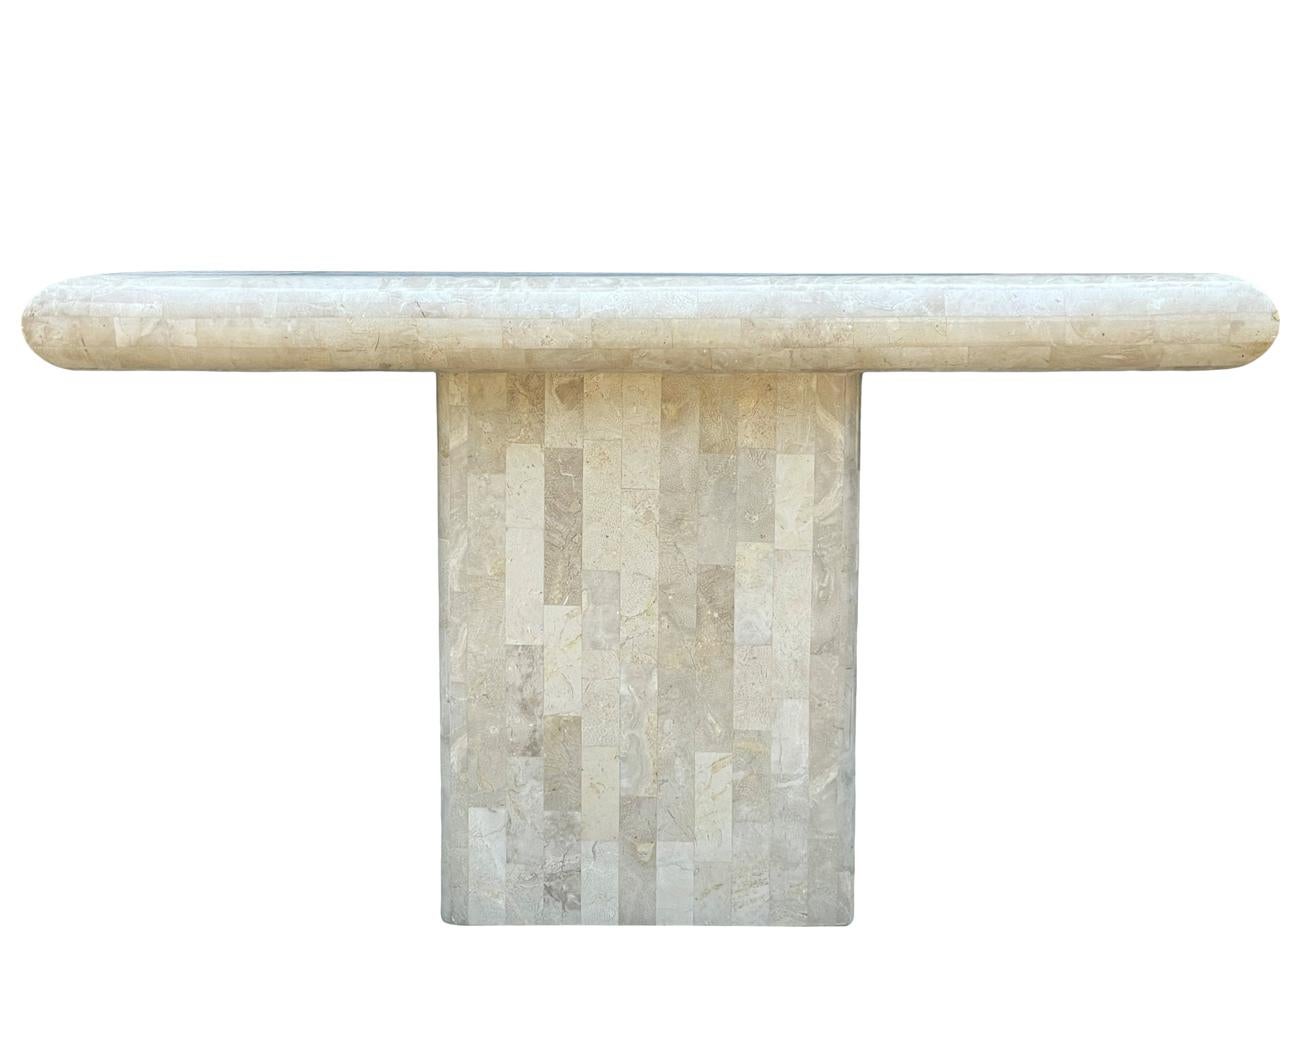 American Hollywood Regency Tessellated Stone or White Marble Console Table or Sofa Table For Sale